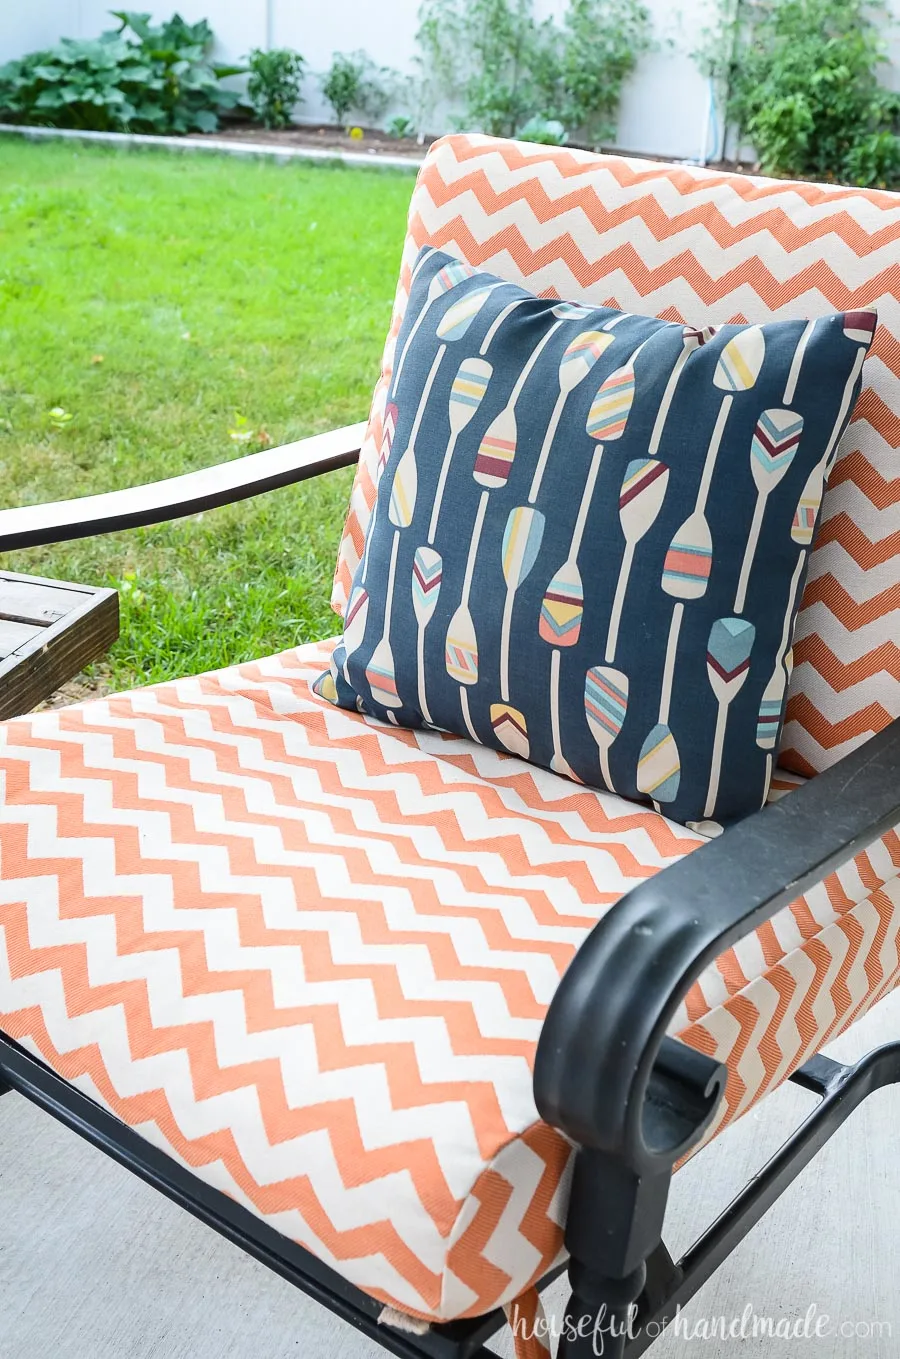 Bright colors give our outdoor living spaces an island vibe. These white and orange striped outdoor cushions are perfect with the colorful ores on a navy background pillow. 